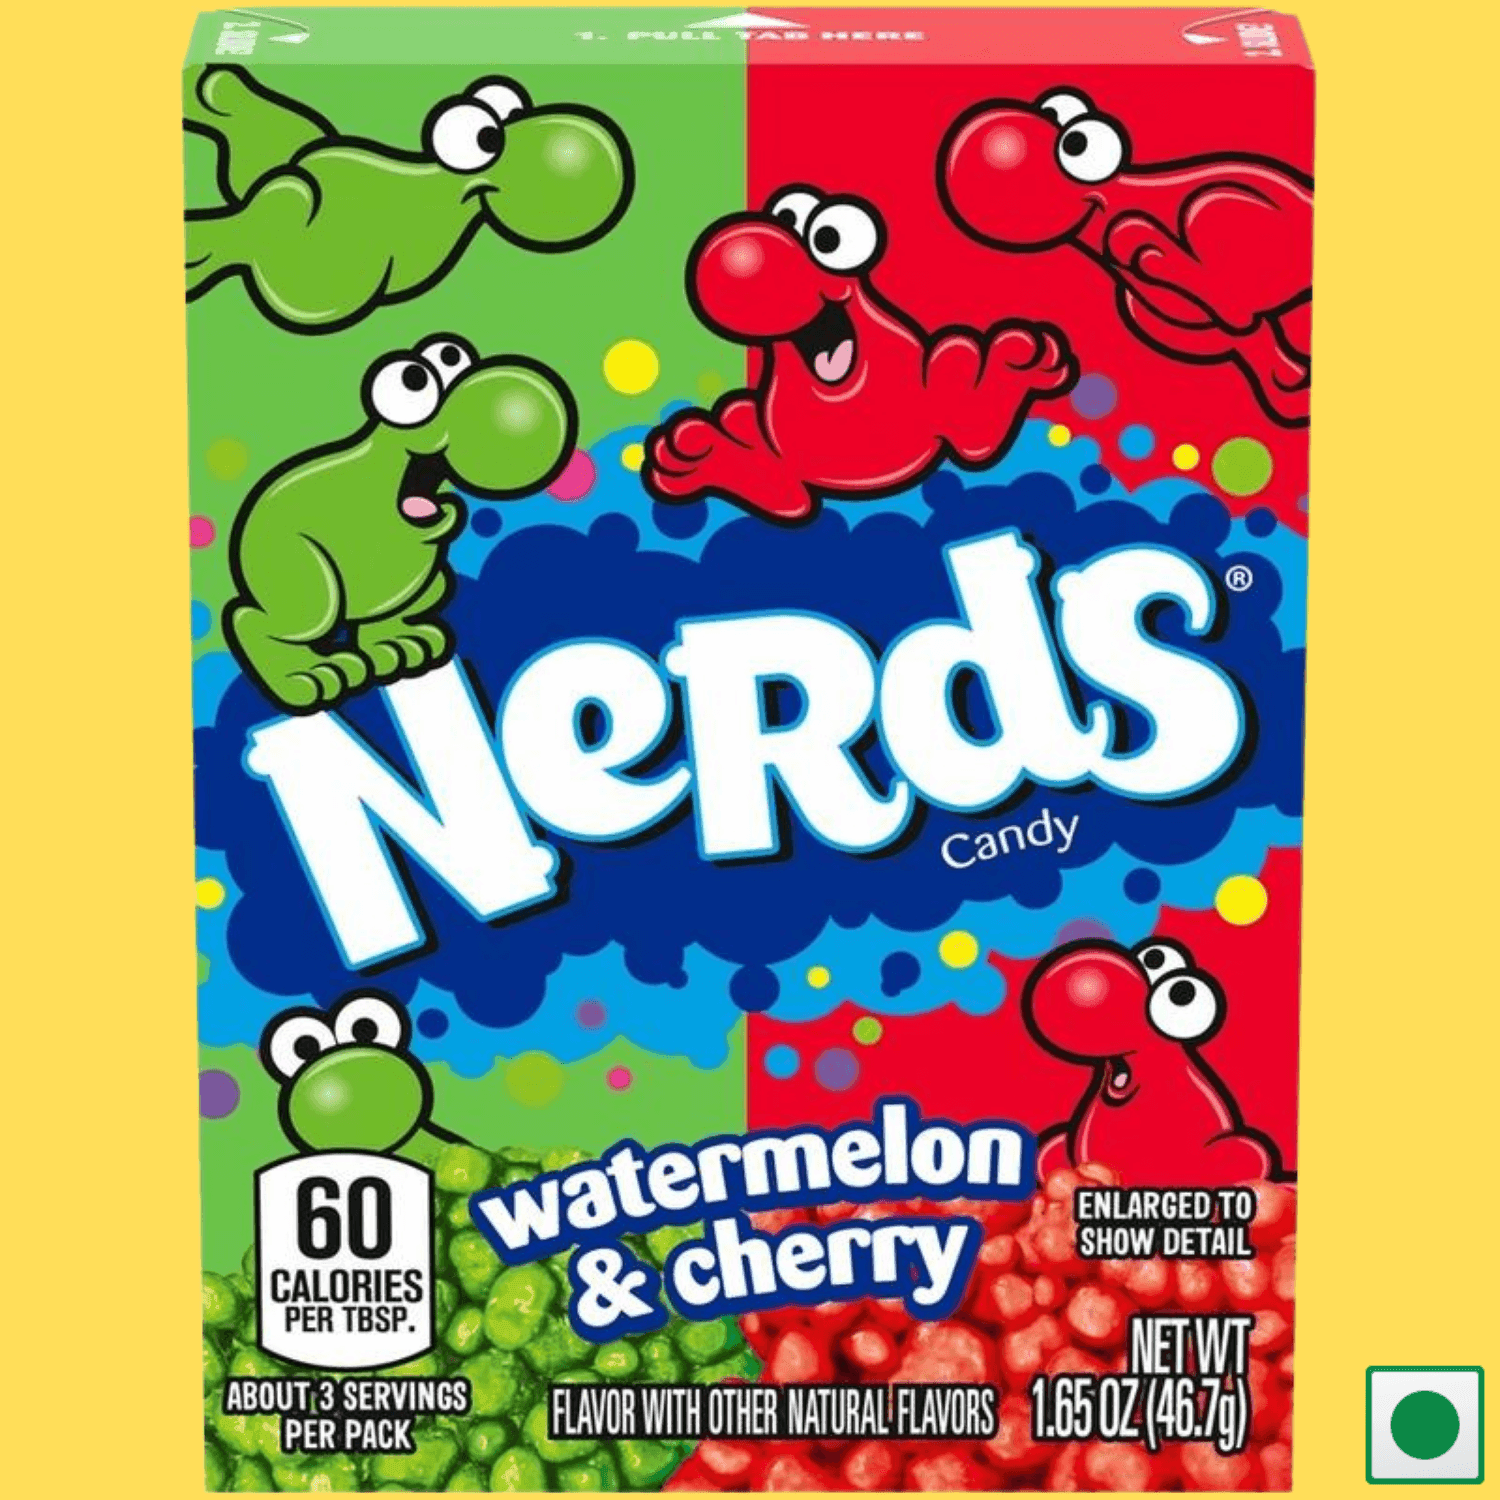 Nerds Watermelon & Cherry Candy, 46.7g (Imported) - Super 7 Mart